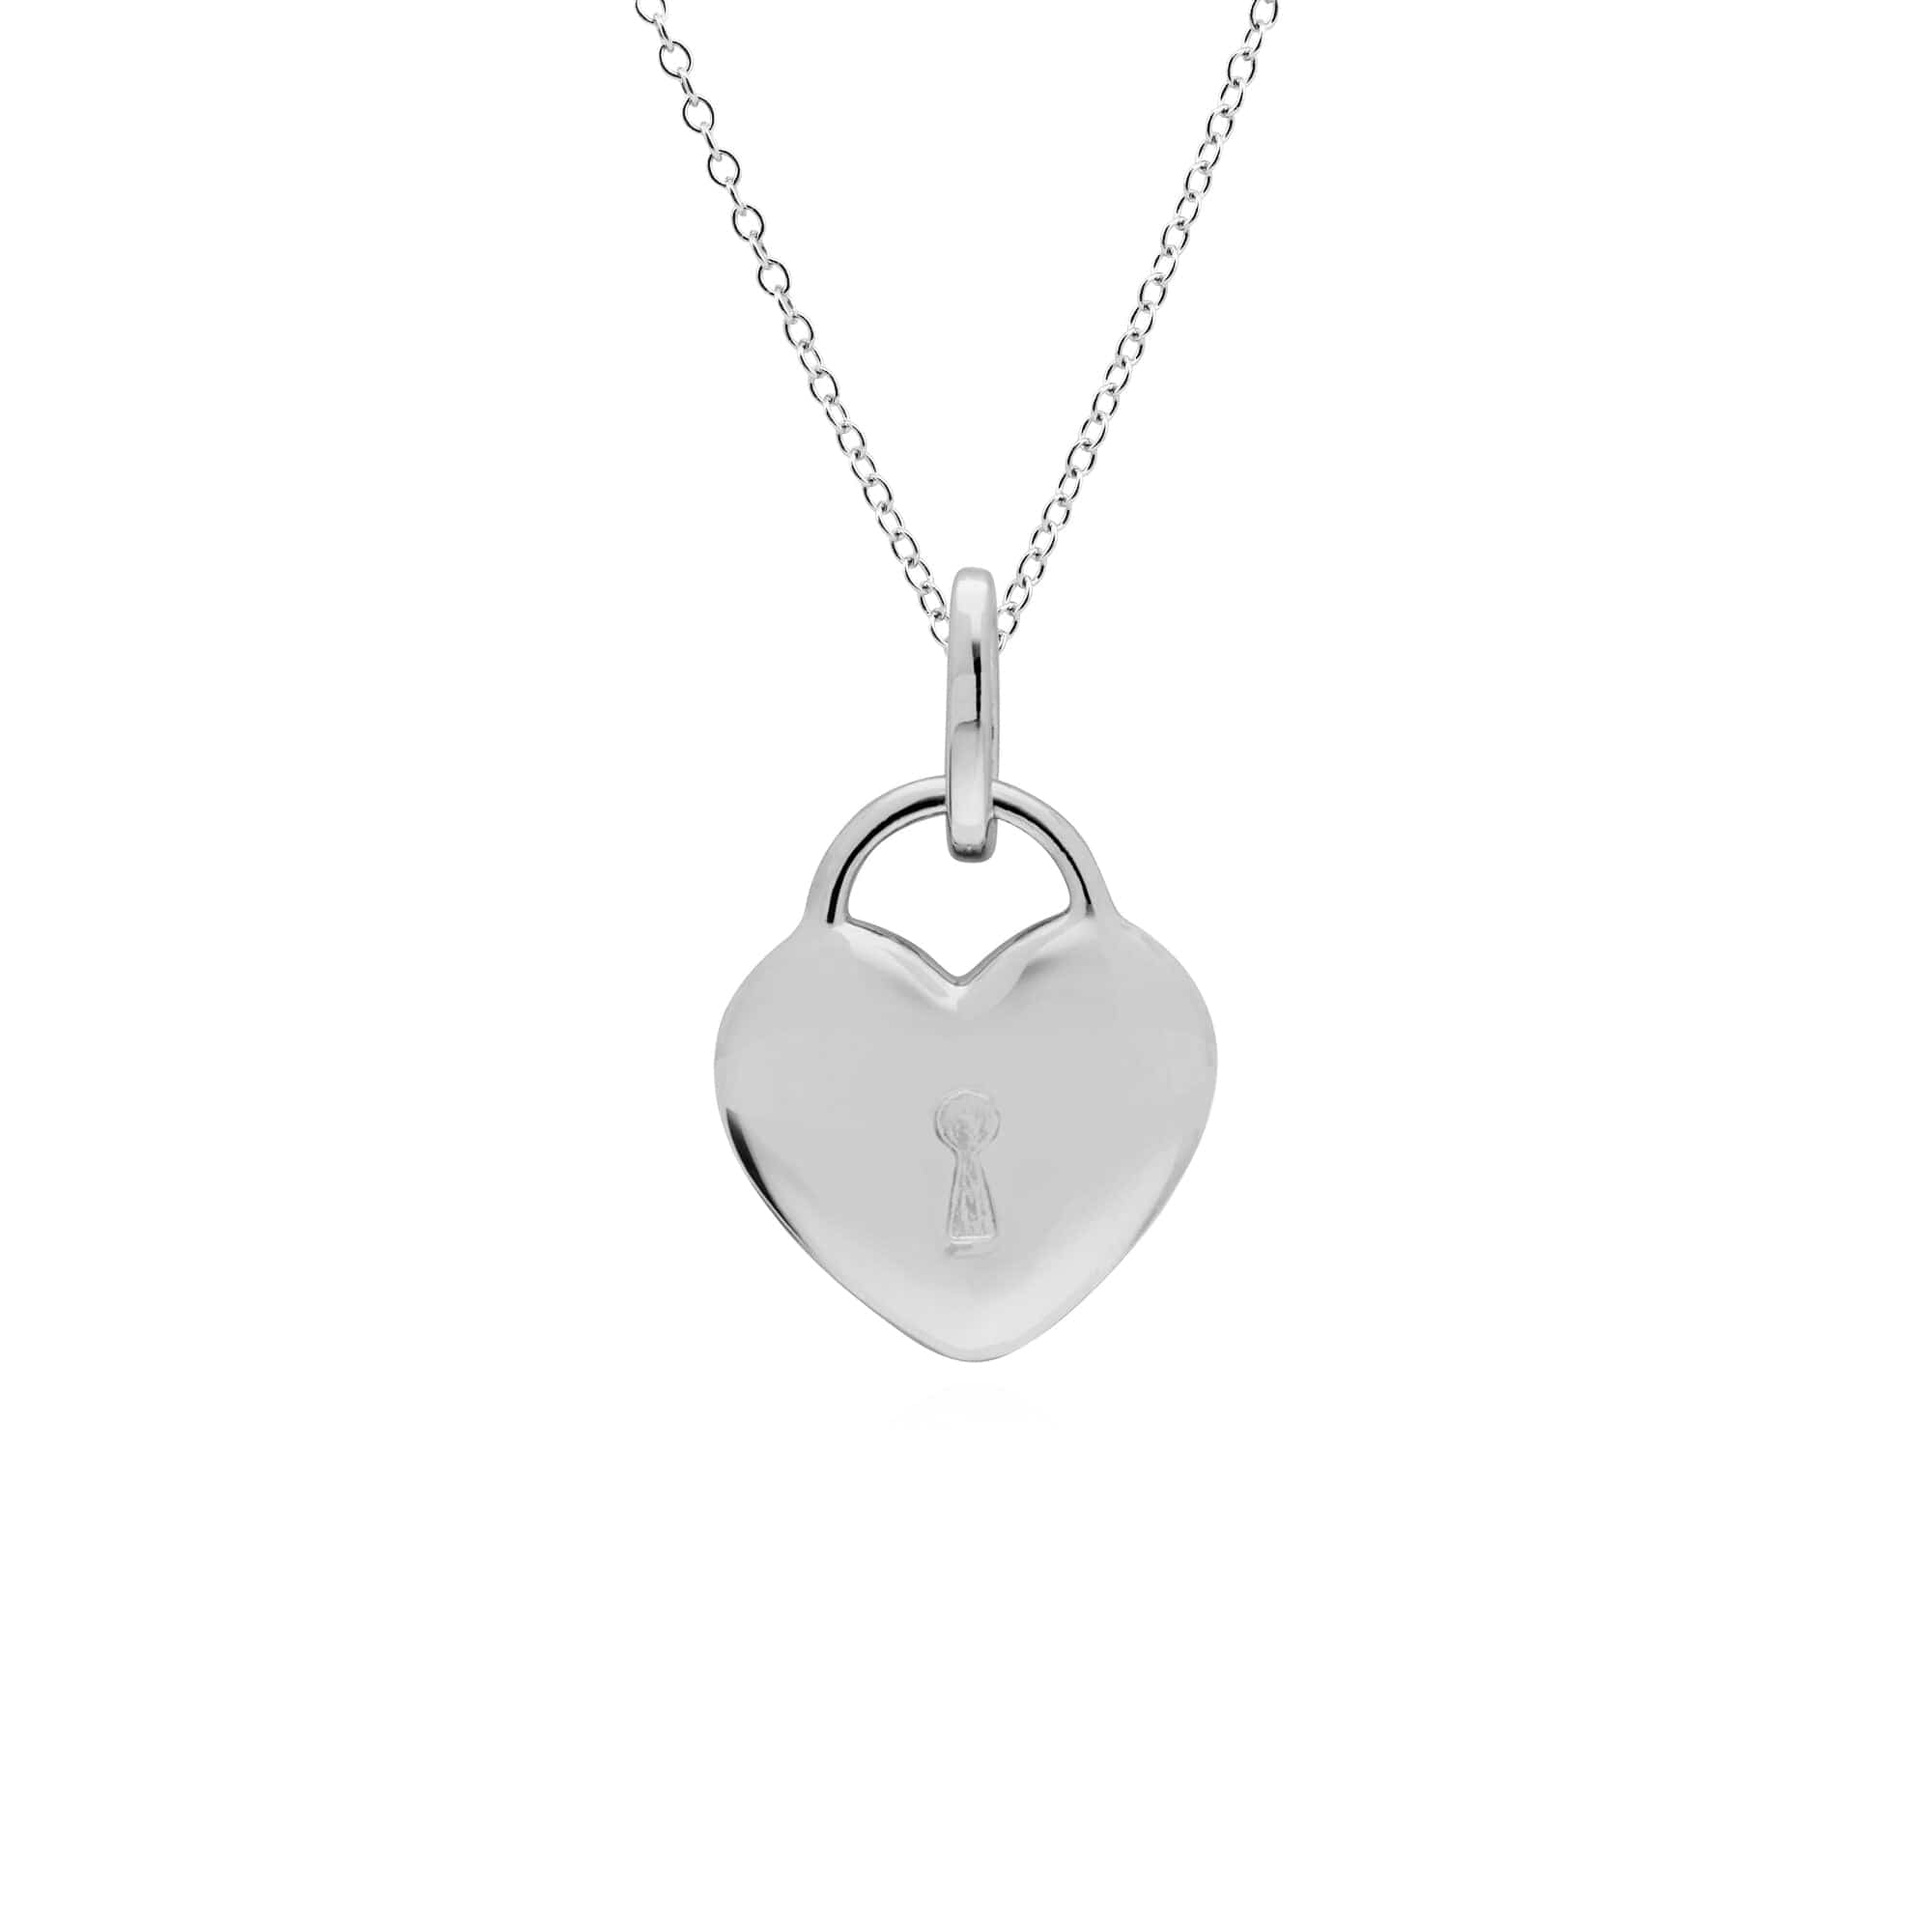 270P028401925-270P027001925 Classic Heart Lock Pendant & Rainbow Moonstone Charm in 925 Sterling Silver 3